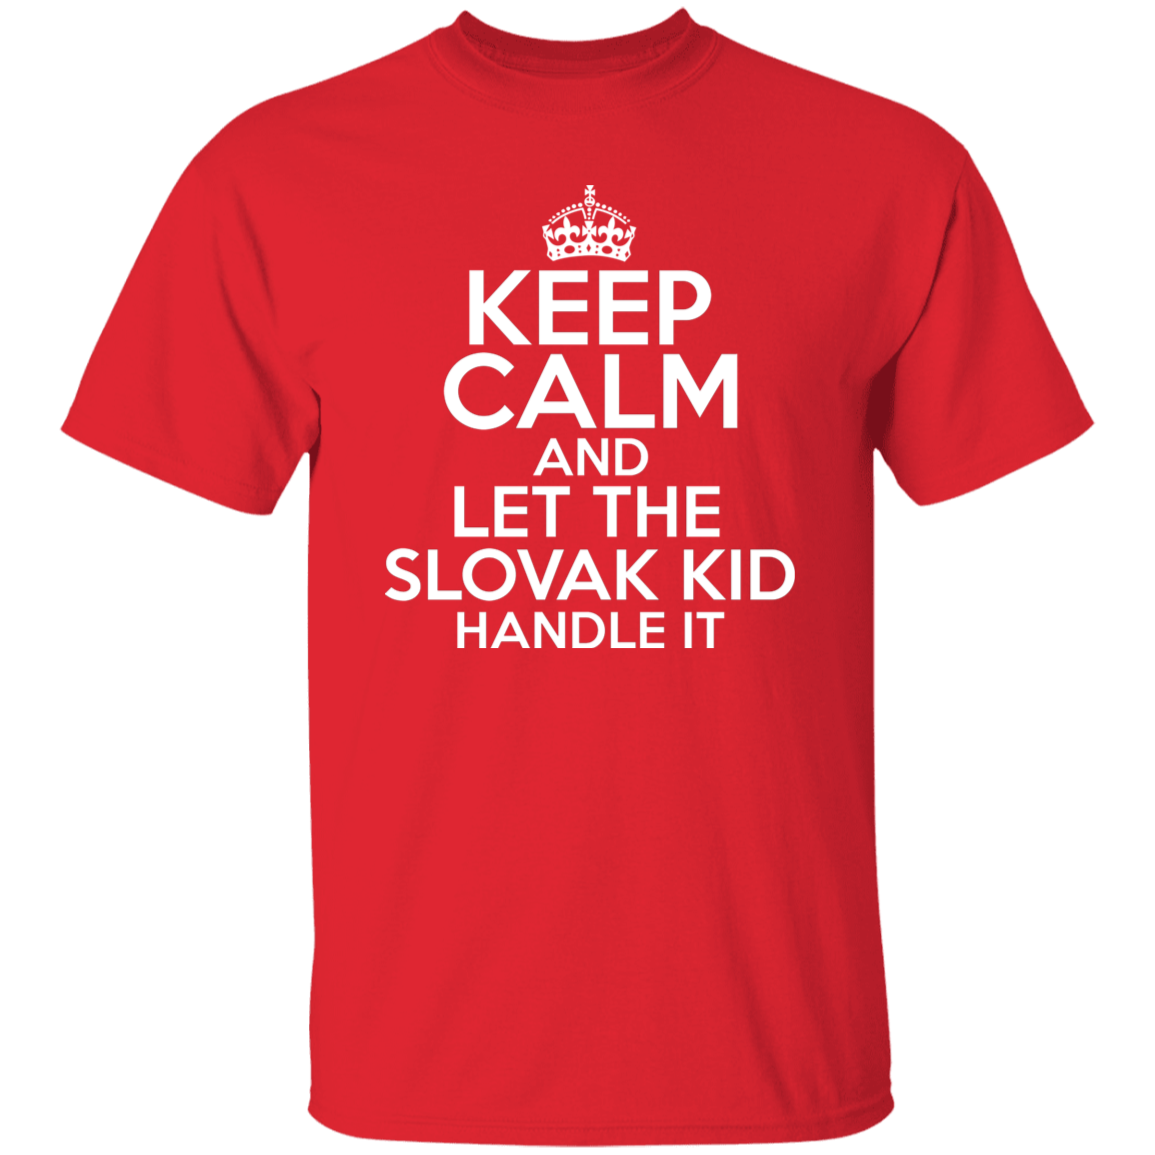 Keep Calm And Let The Slovak Kid Handle It Apparel CustomCat G500 5.3 oz. T-Shirt Red S